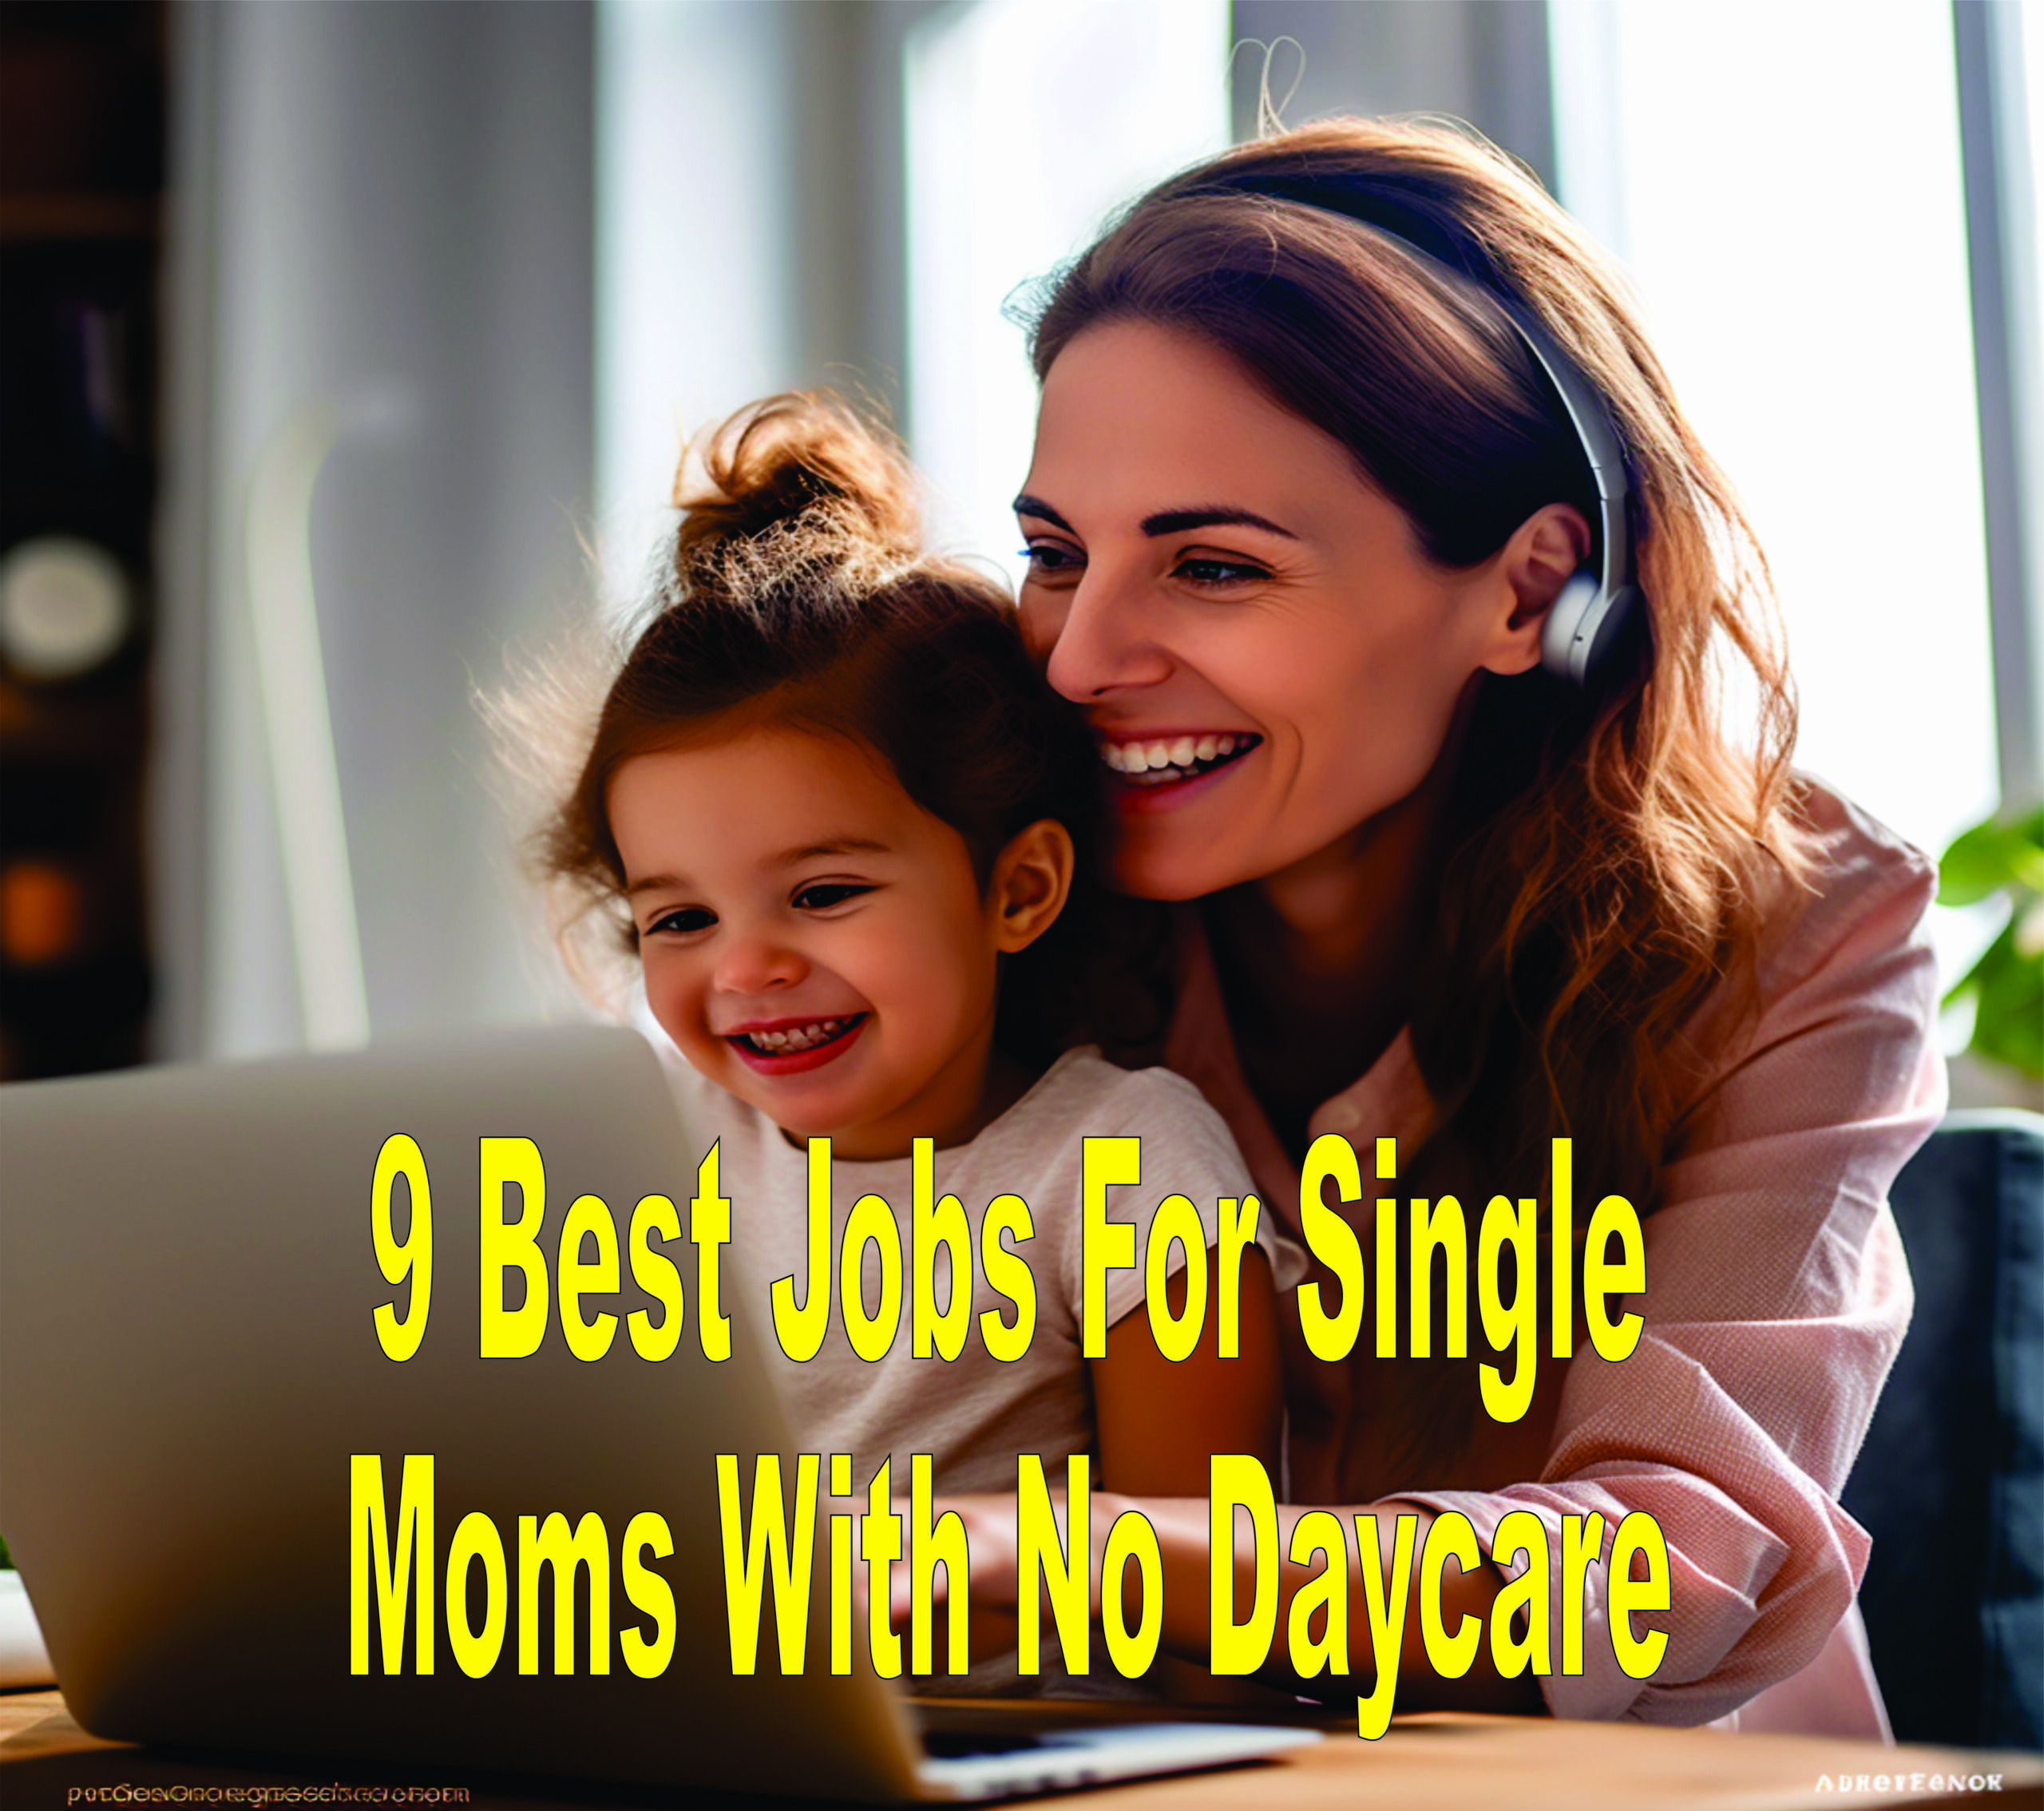 9 Best Jobs For Single Moms With No Daycare